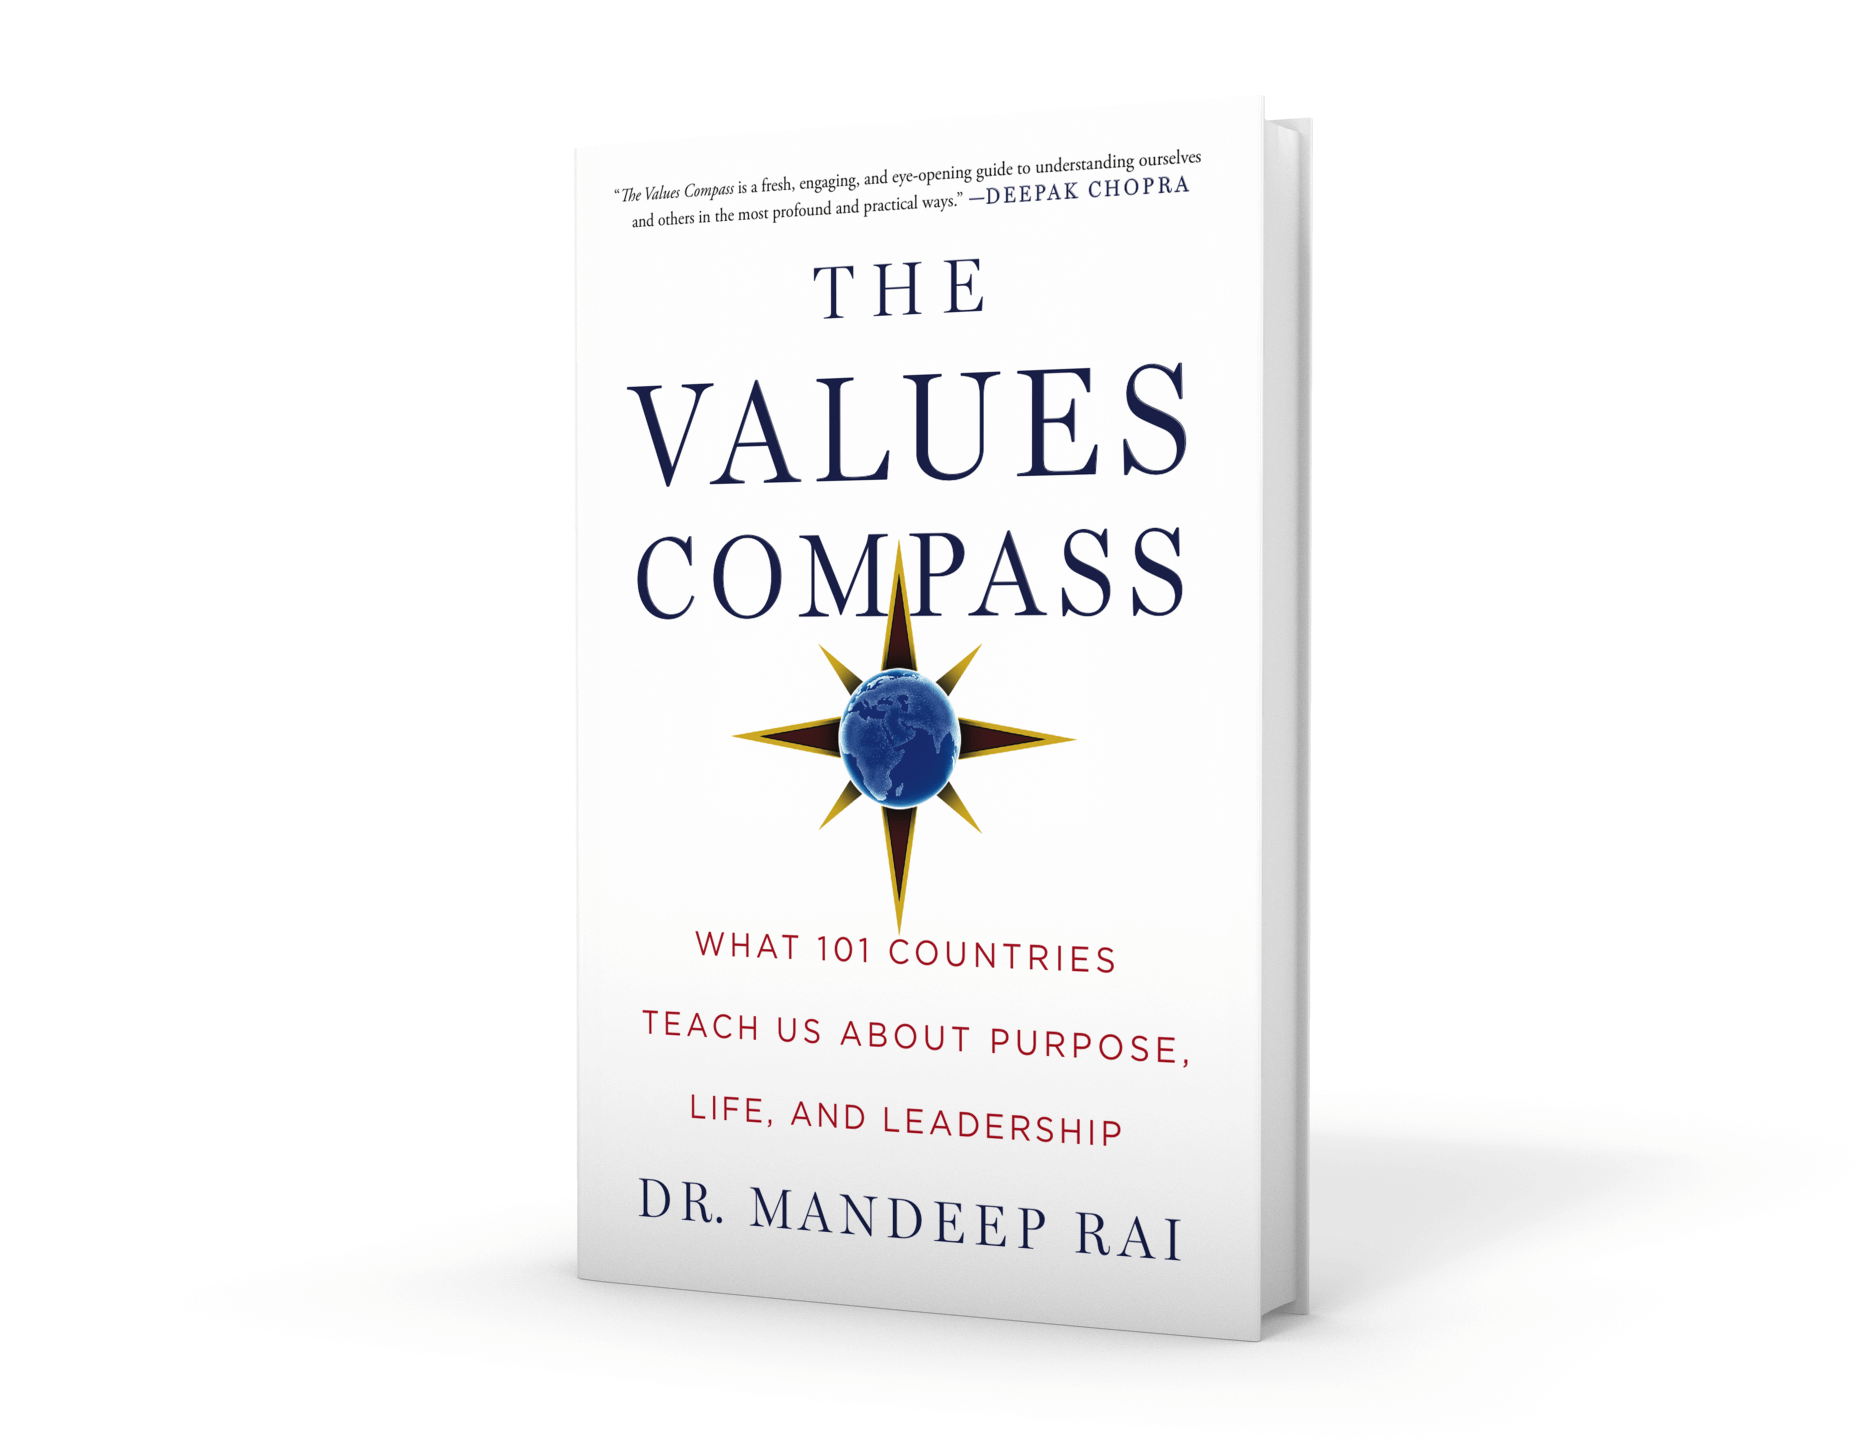 Image of The Values Compass Book by Mandeep Rai